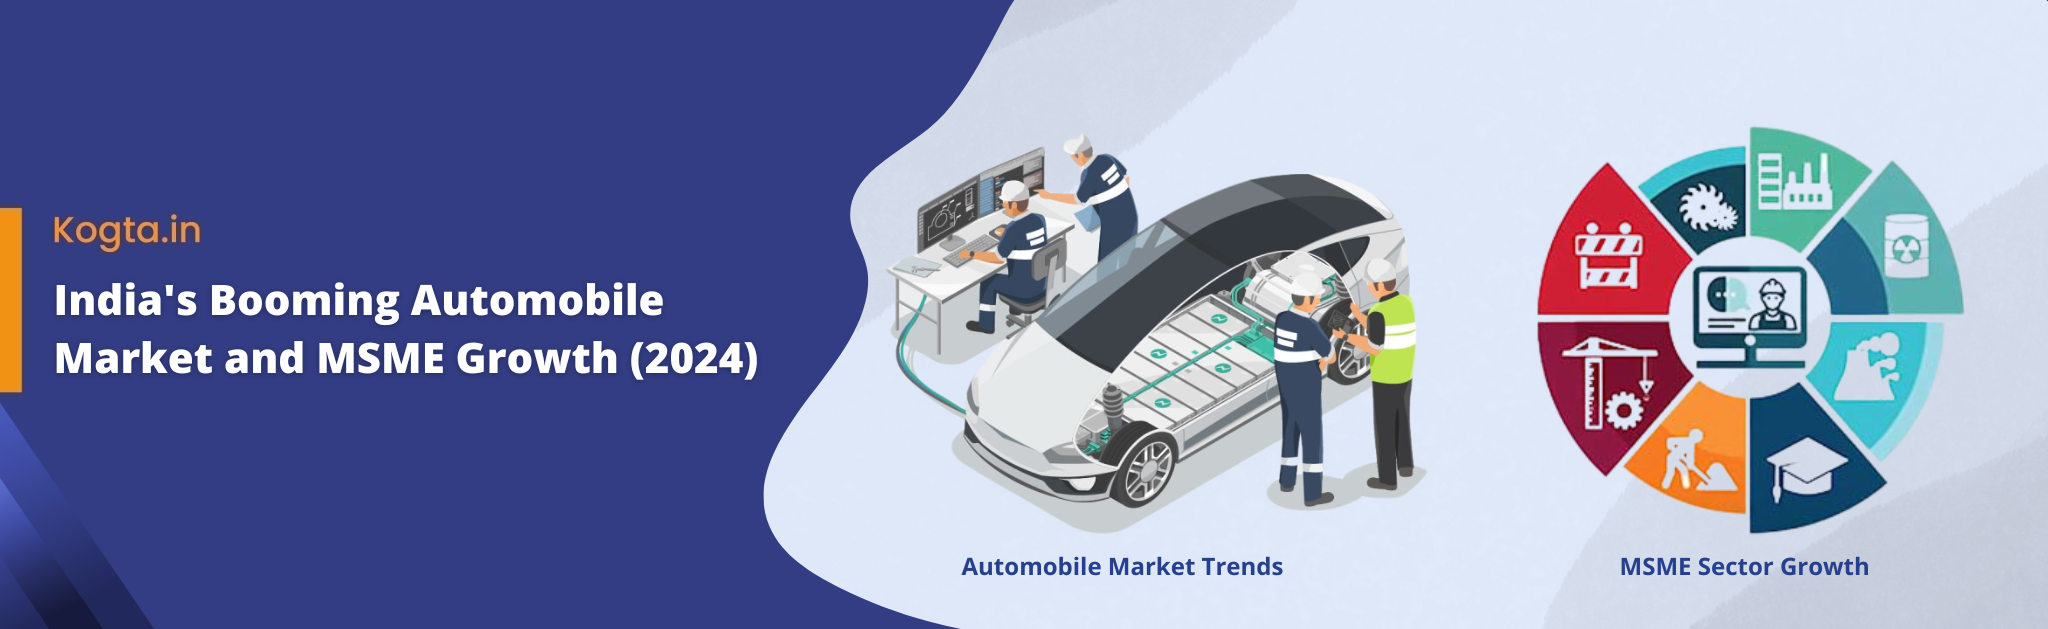 India's Booming Automobile Market and MSME Growth (2024)